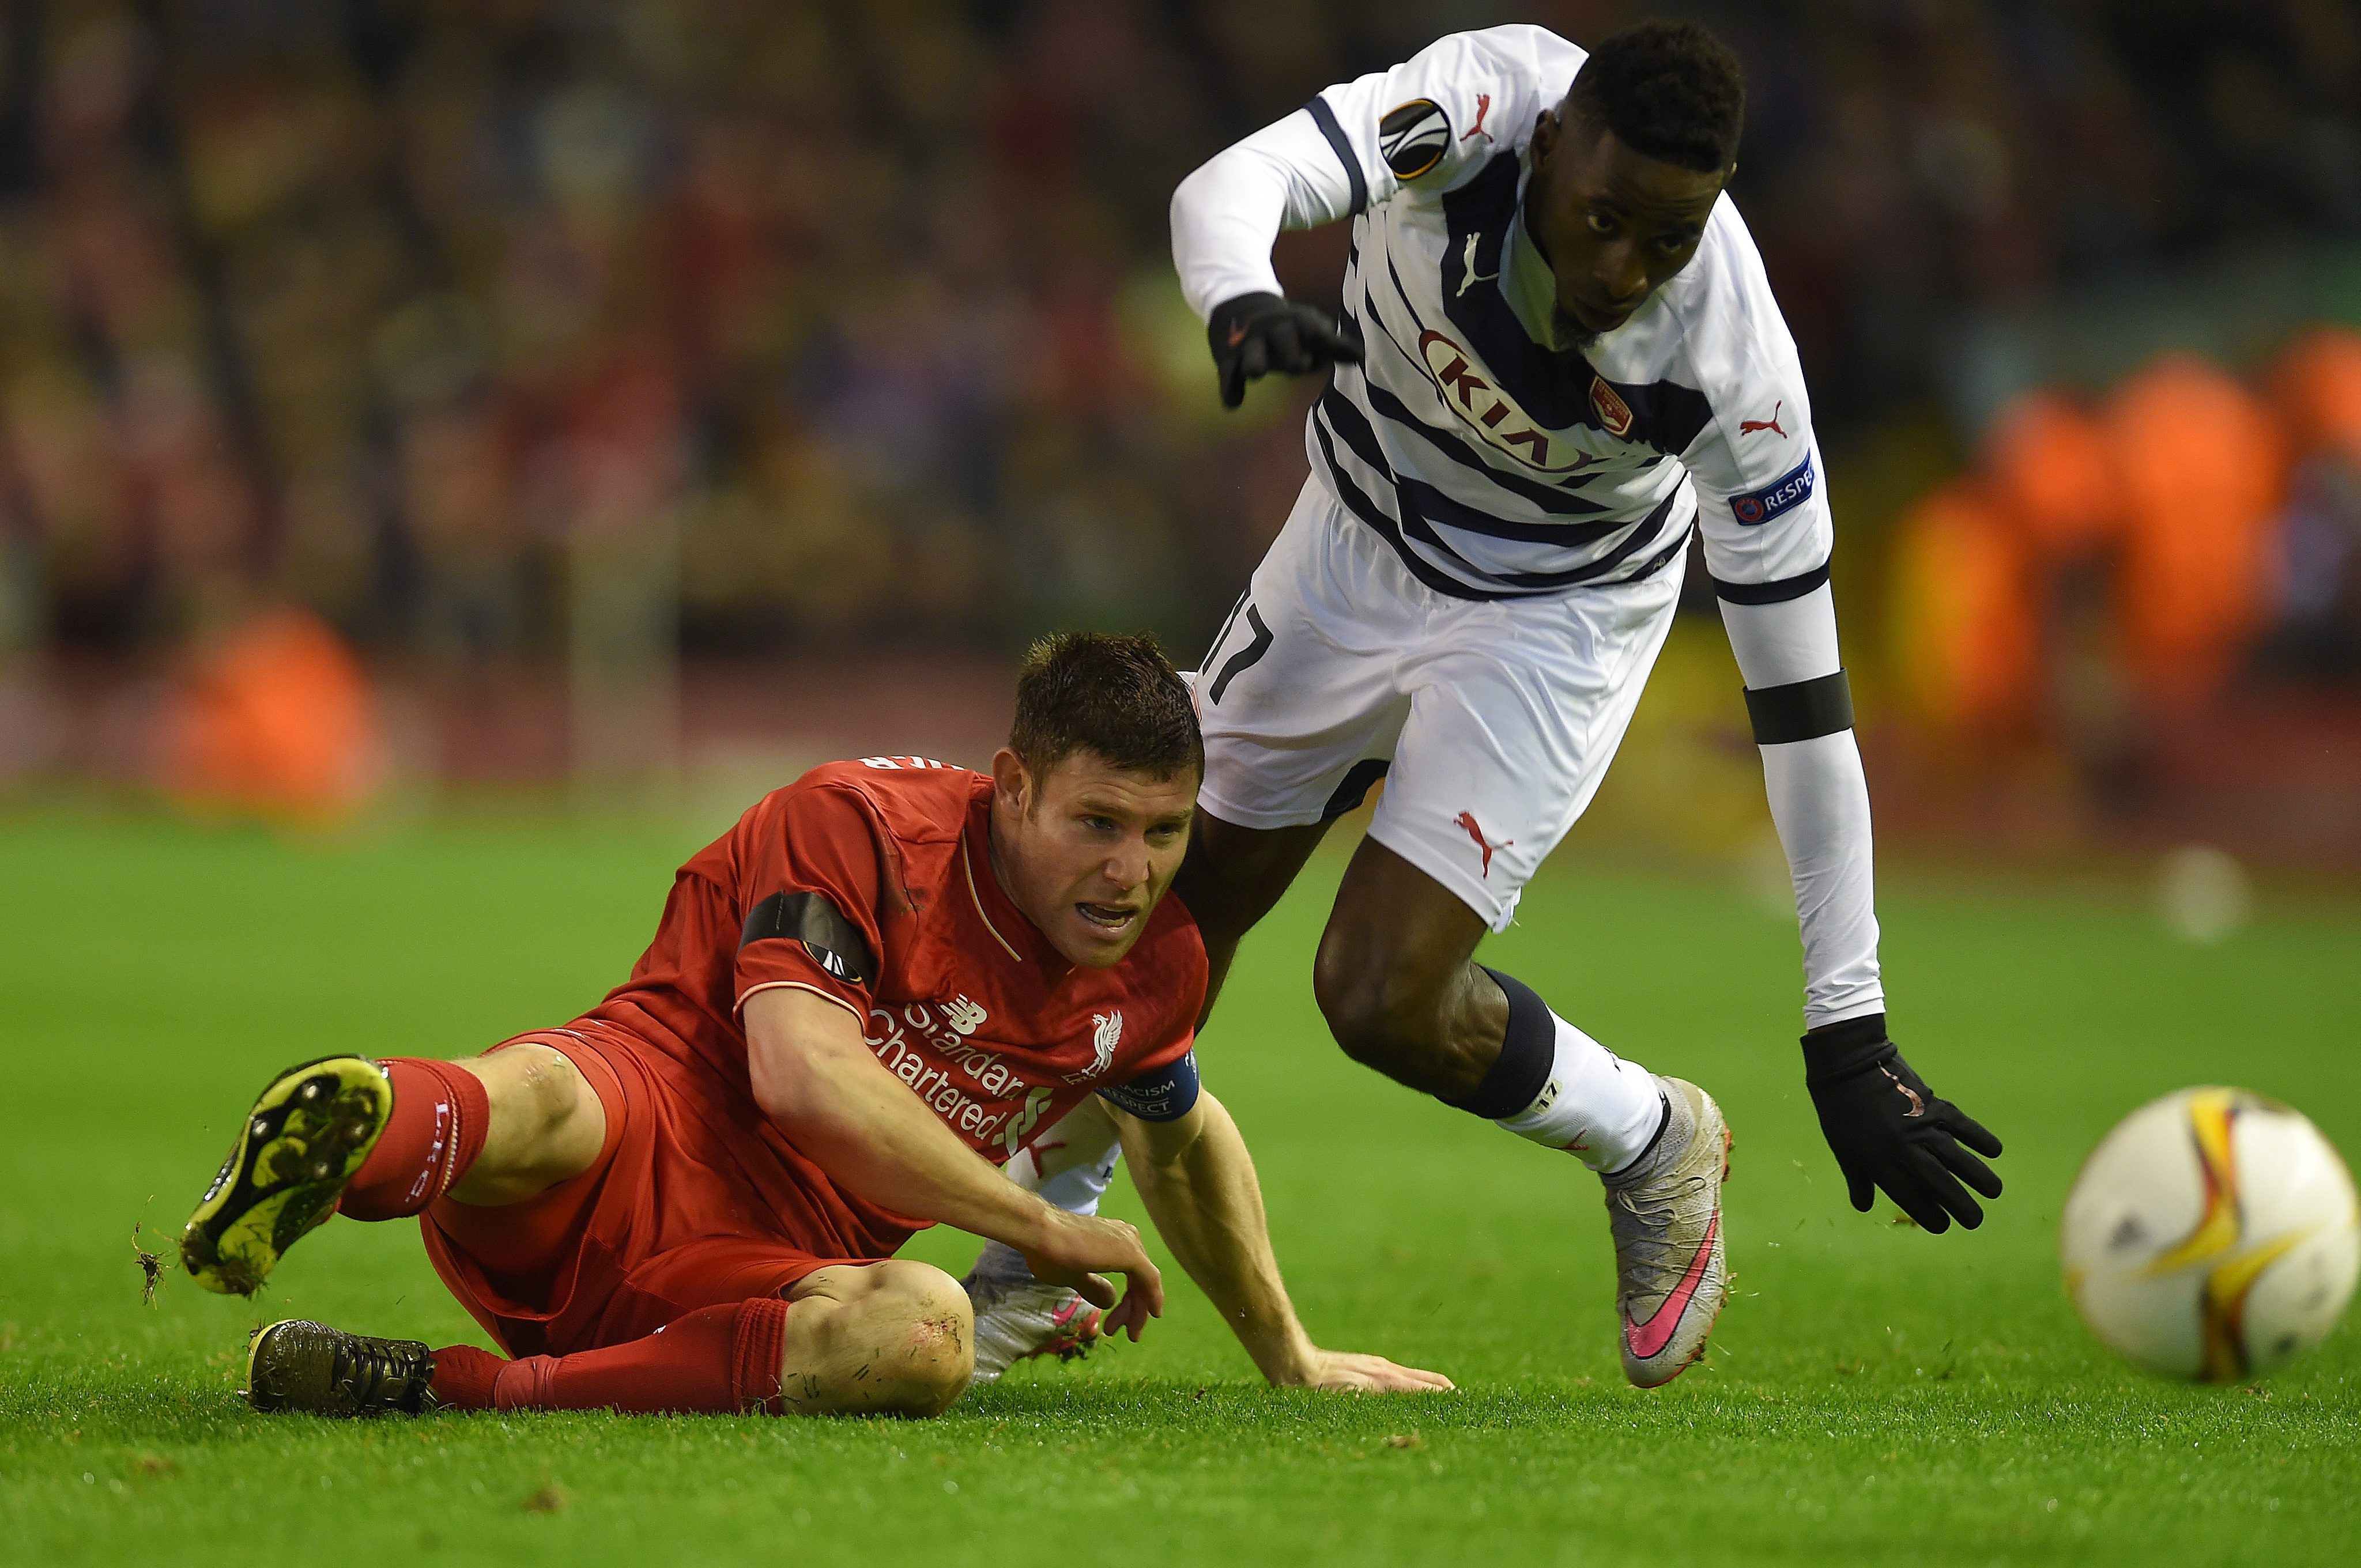 epa05043332 Liverpool's James Milner (L) in action with  Bordeaux's Andre Biyogo Poko (R) during the UEFA Europa League group B soccer match between Liverpool FC and FC Girondins de Bordeaux held at Anfield in Liverpool, Britain, 26 November 2015.  EPA/PETER POWELL